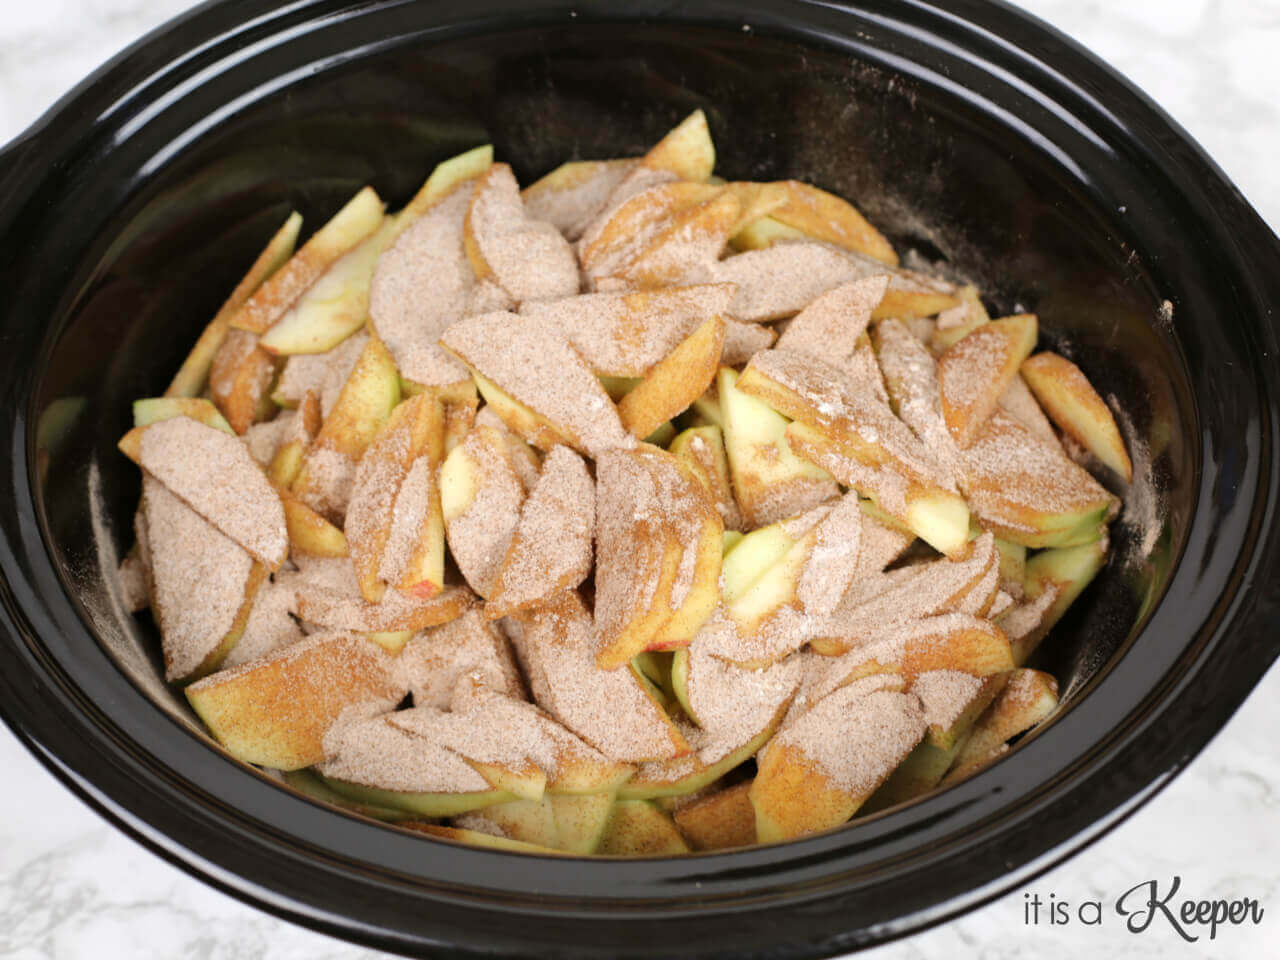 apples with sugar and cinnamon in a slow cooker